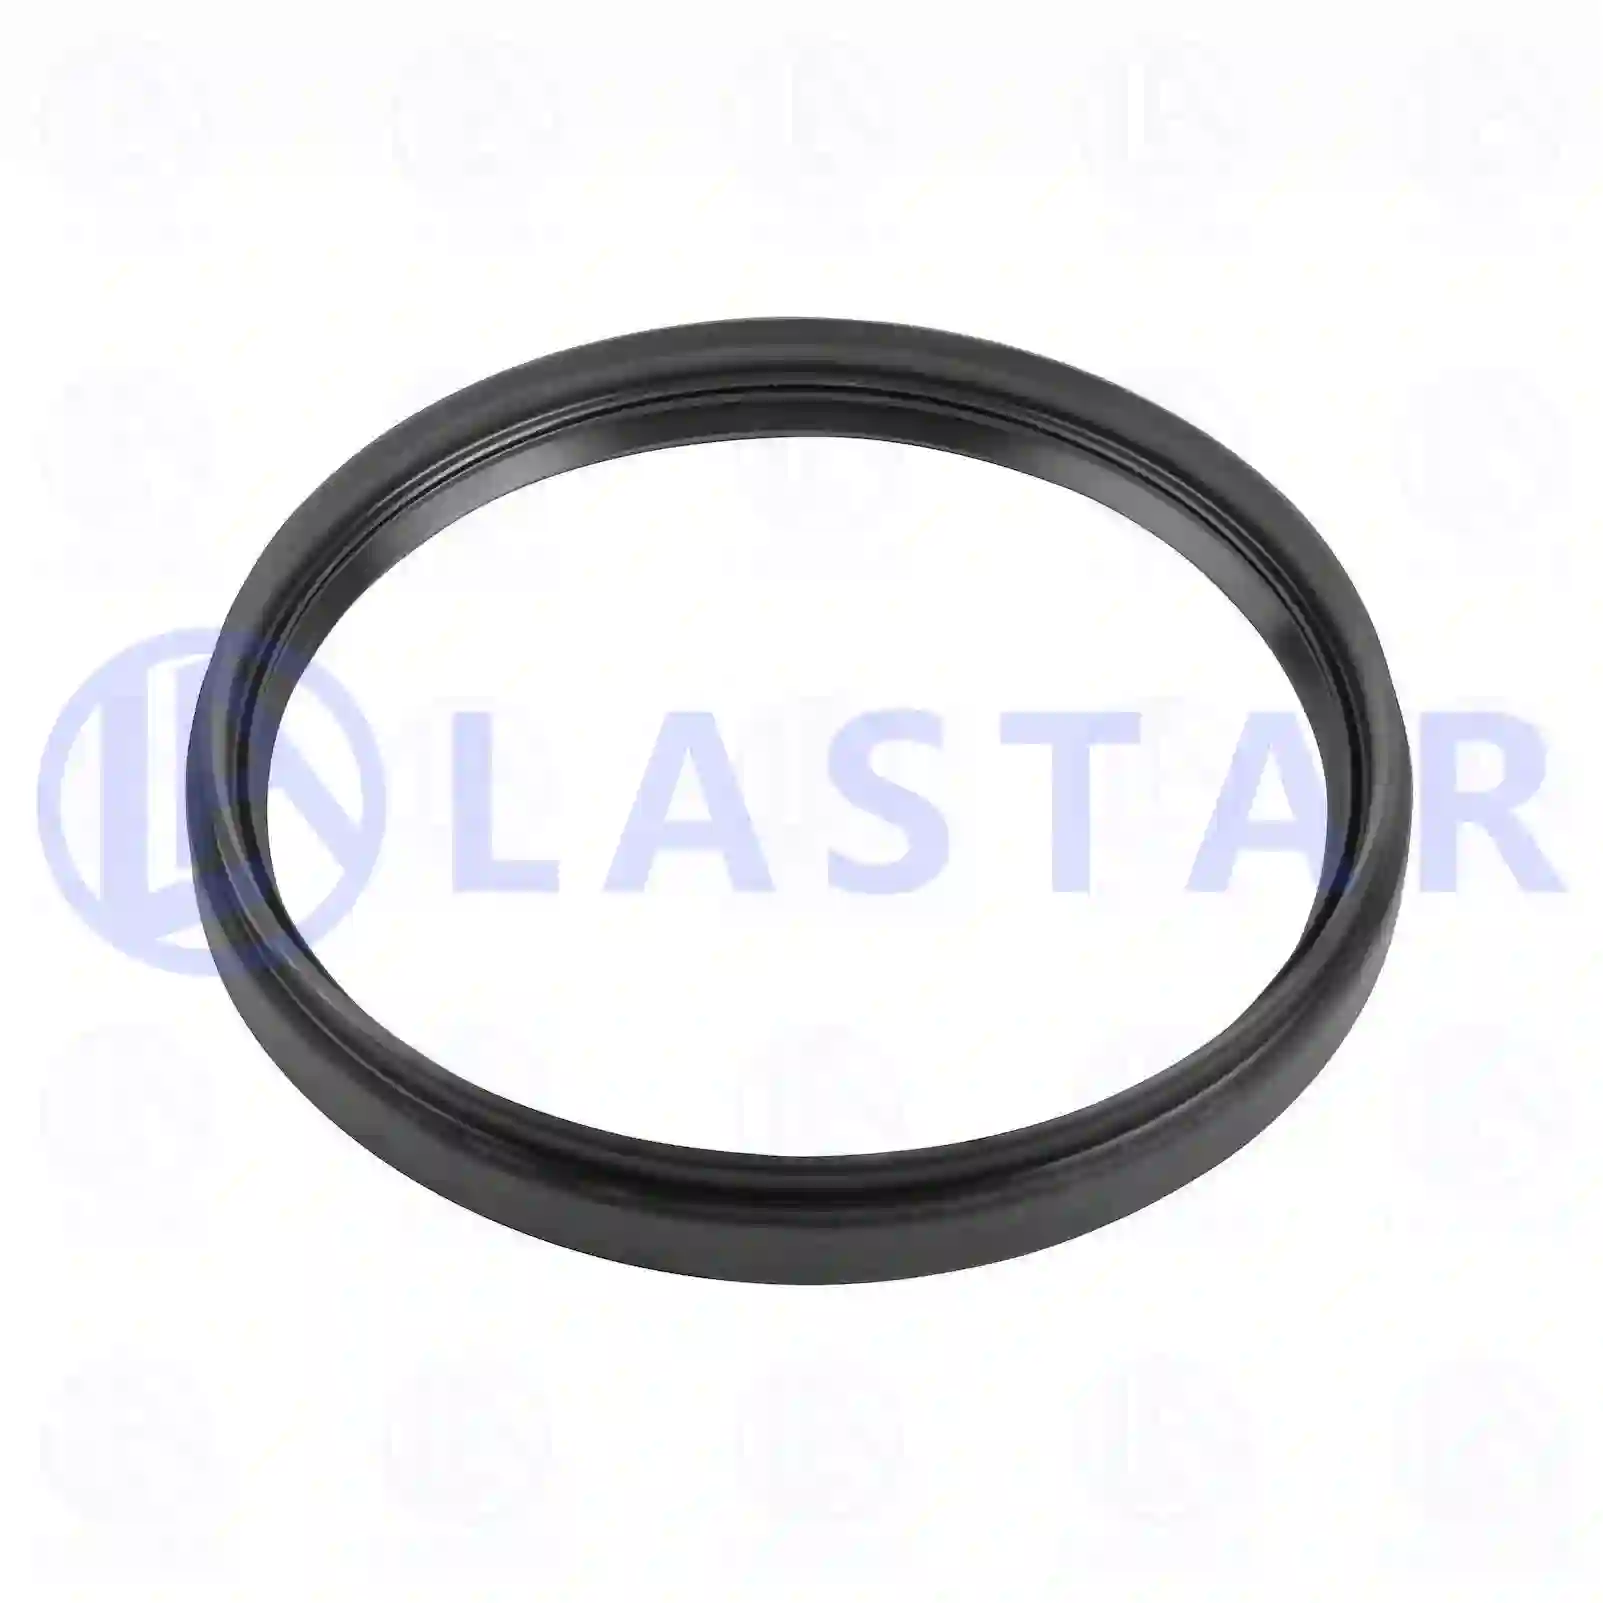 Oil seal, 77728458, 40101540, , , ||  77728458 Lastar Spare Part | Truck Spare Parts, Auotomotive Spare Parts Oil seal, 77728458, 40101540, , , ||  77728458 Lastar Spare Part | Truck Spare Parts, Auotomotive Spare Parts